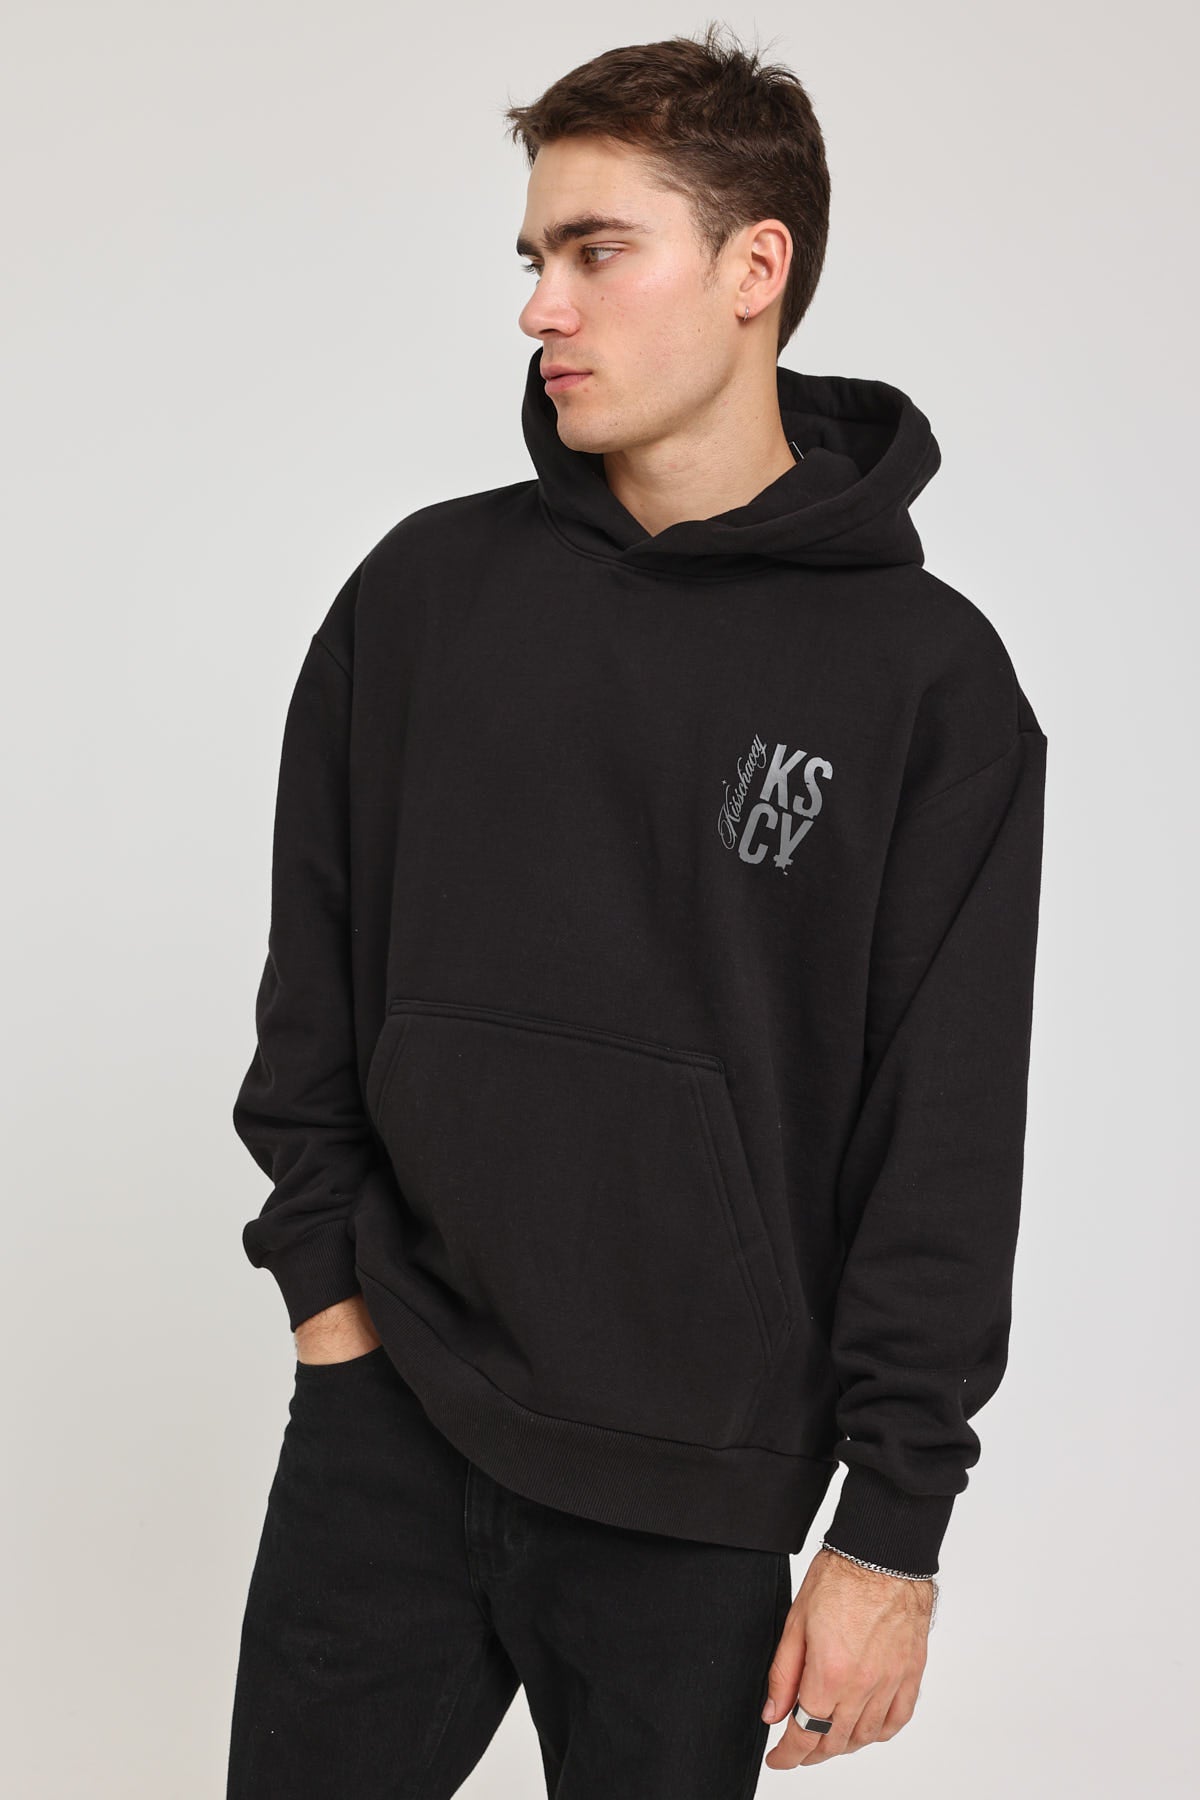 Kiss Chacey Lost Division Relaxed Hooded Sweater Jet Black